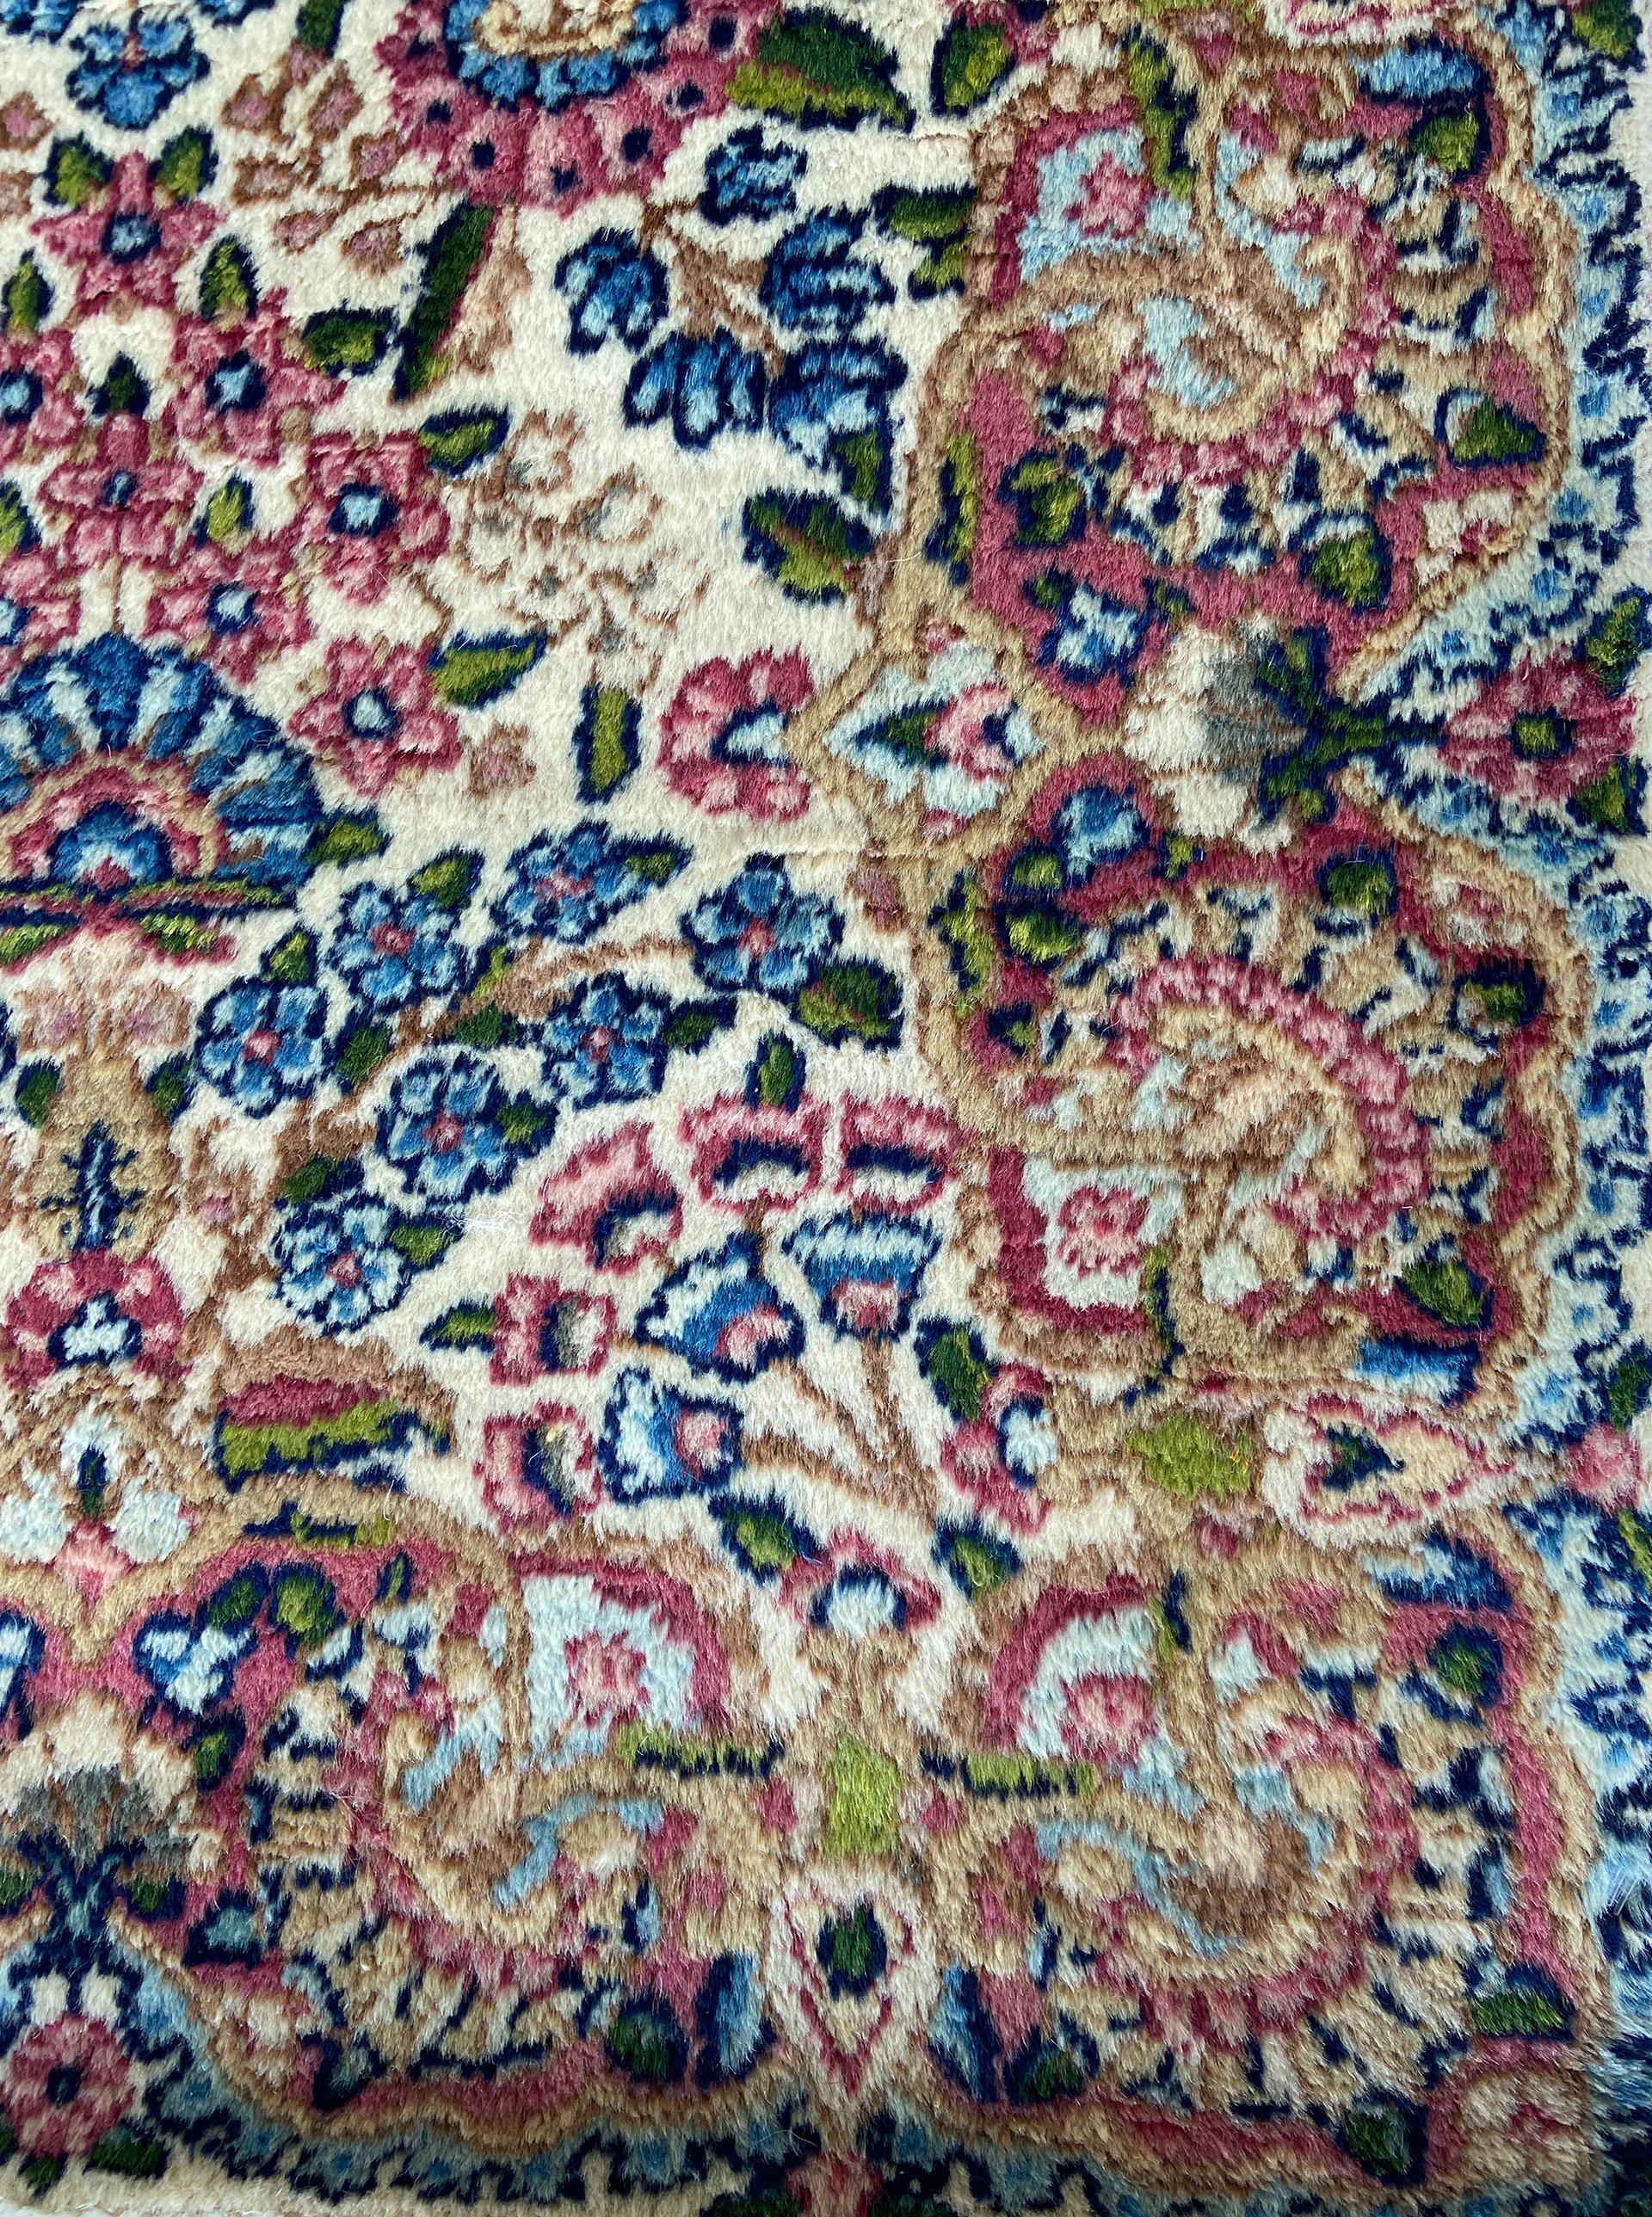 Classically composed and boasting a truly magnificent all-over garden design, this vintage Persian Kerman rug reflects the finer points of timeless Central Asian rug trends. A variety of botanical elements, blossoms and vines are elegantly spread